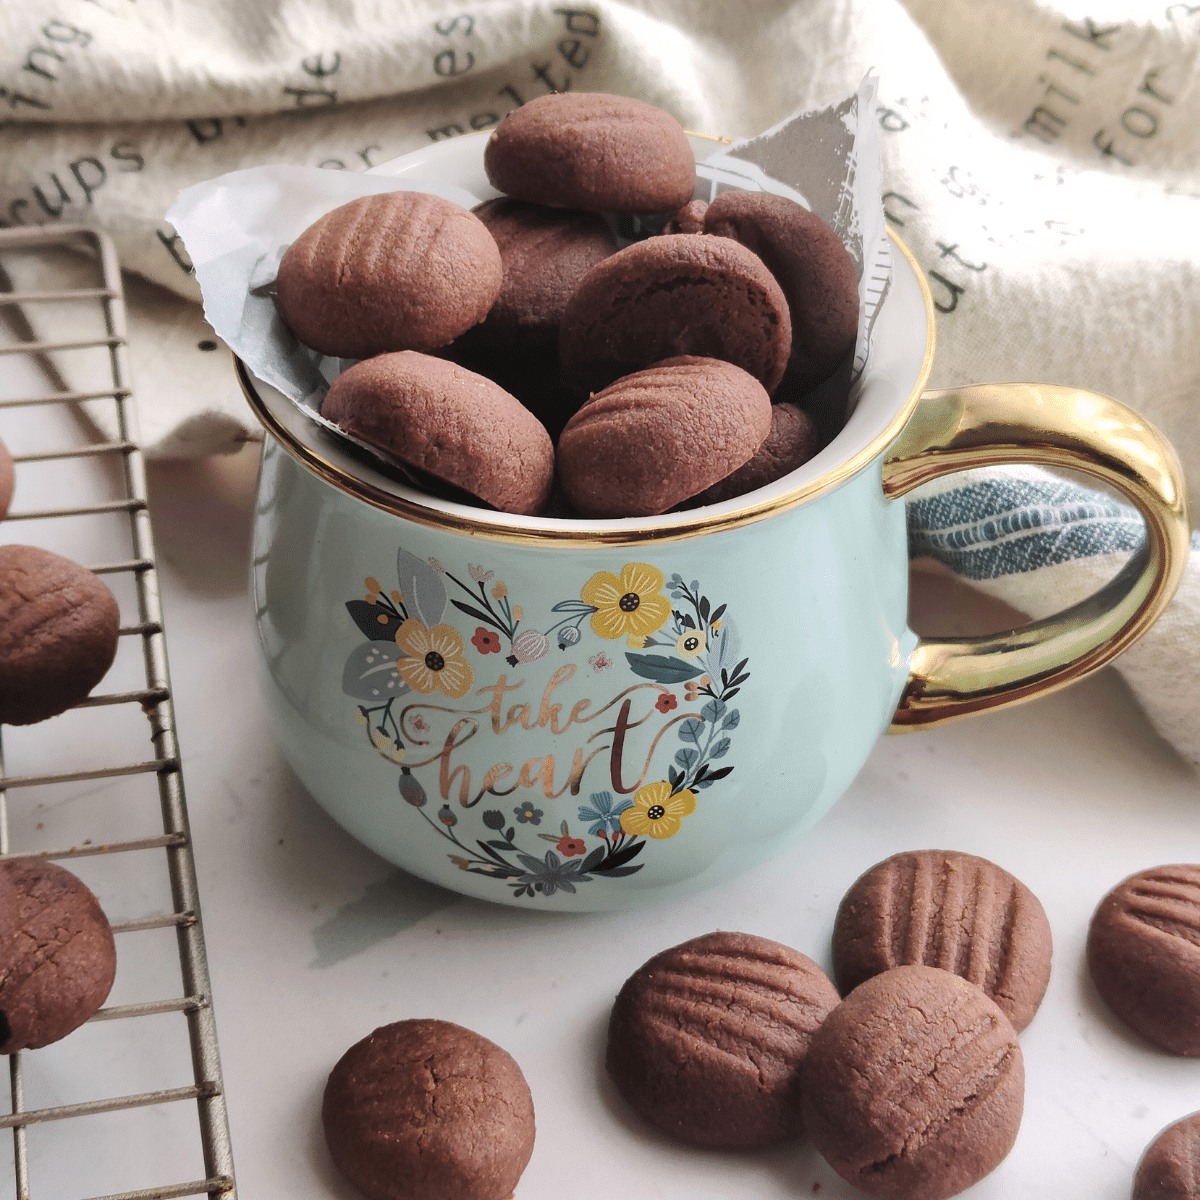 Whip up a batch in under 40 minutes, and that includes the baking time and treat yourself to the irresistible deliciousness of these mini chocolate butter cookies.